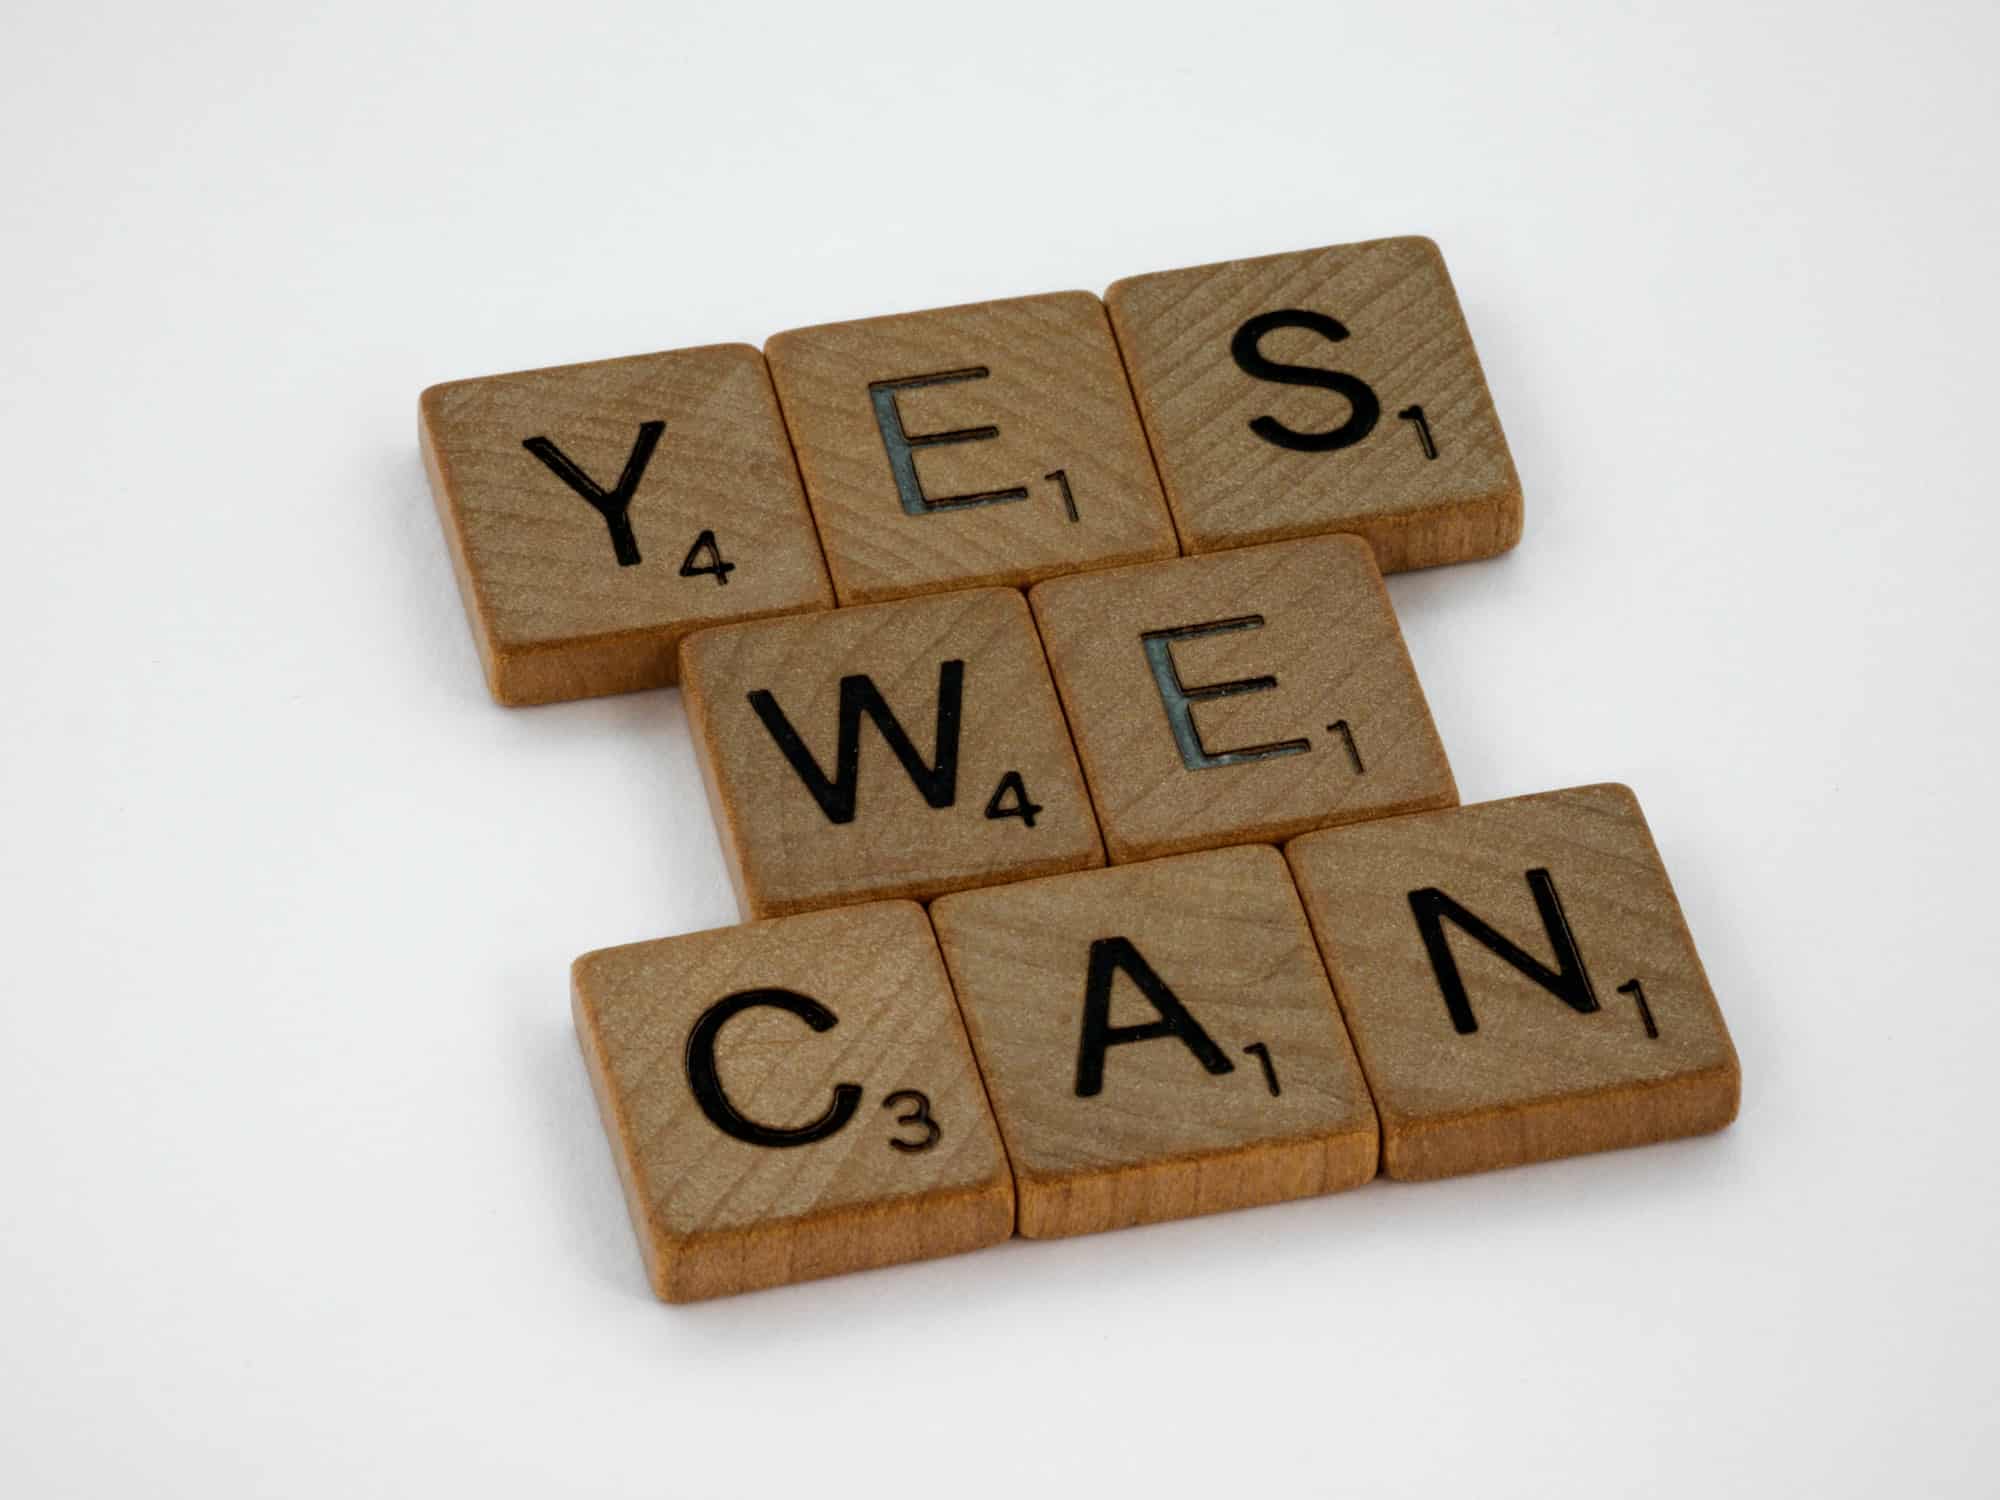 Wooden scrabble tiles that spell out "Yes we can".